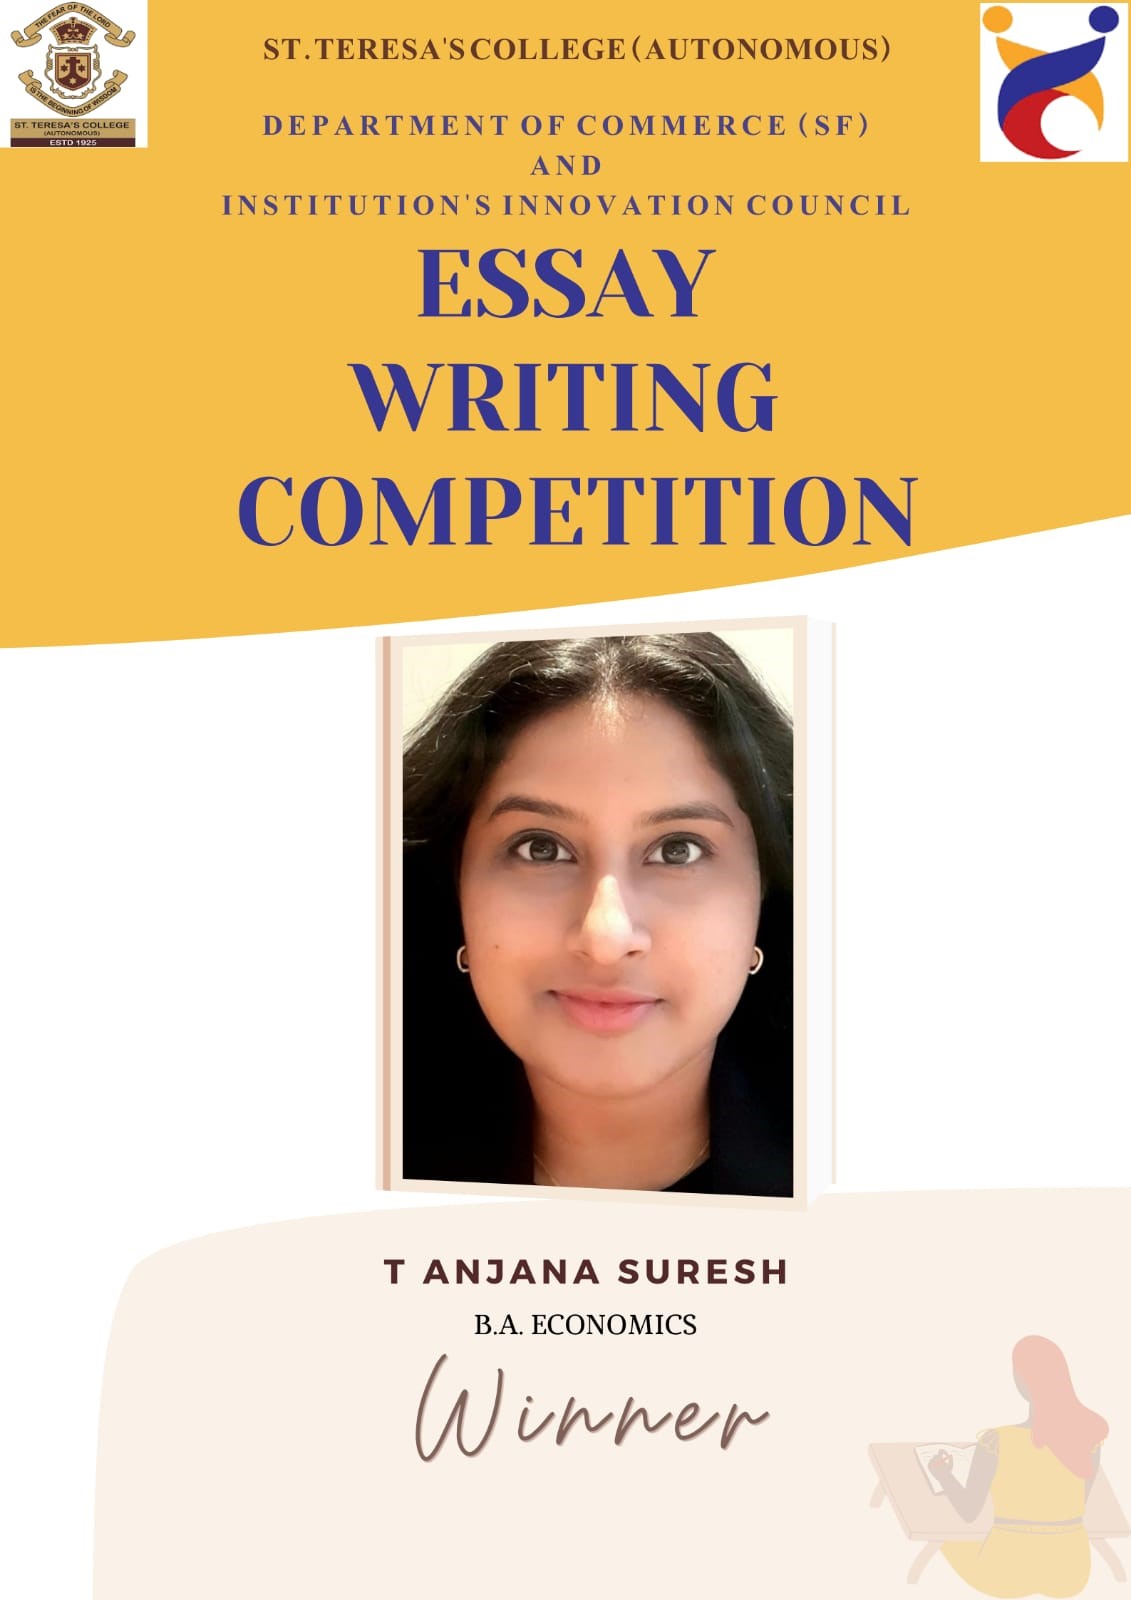 college essay writing competition